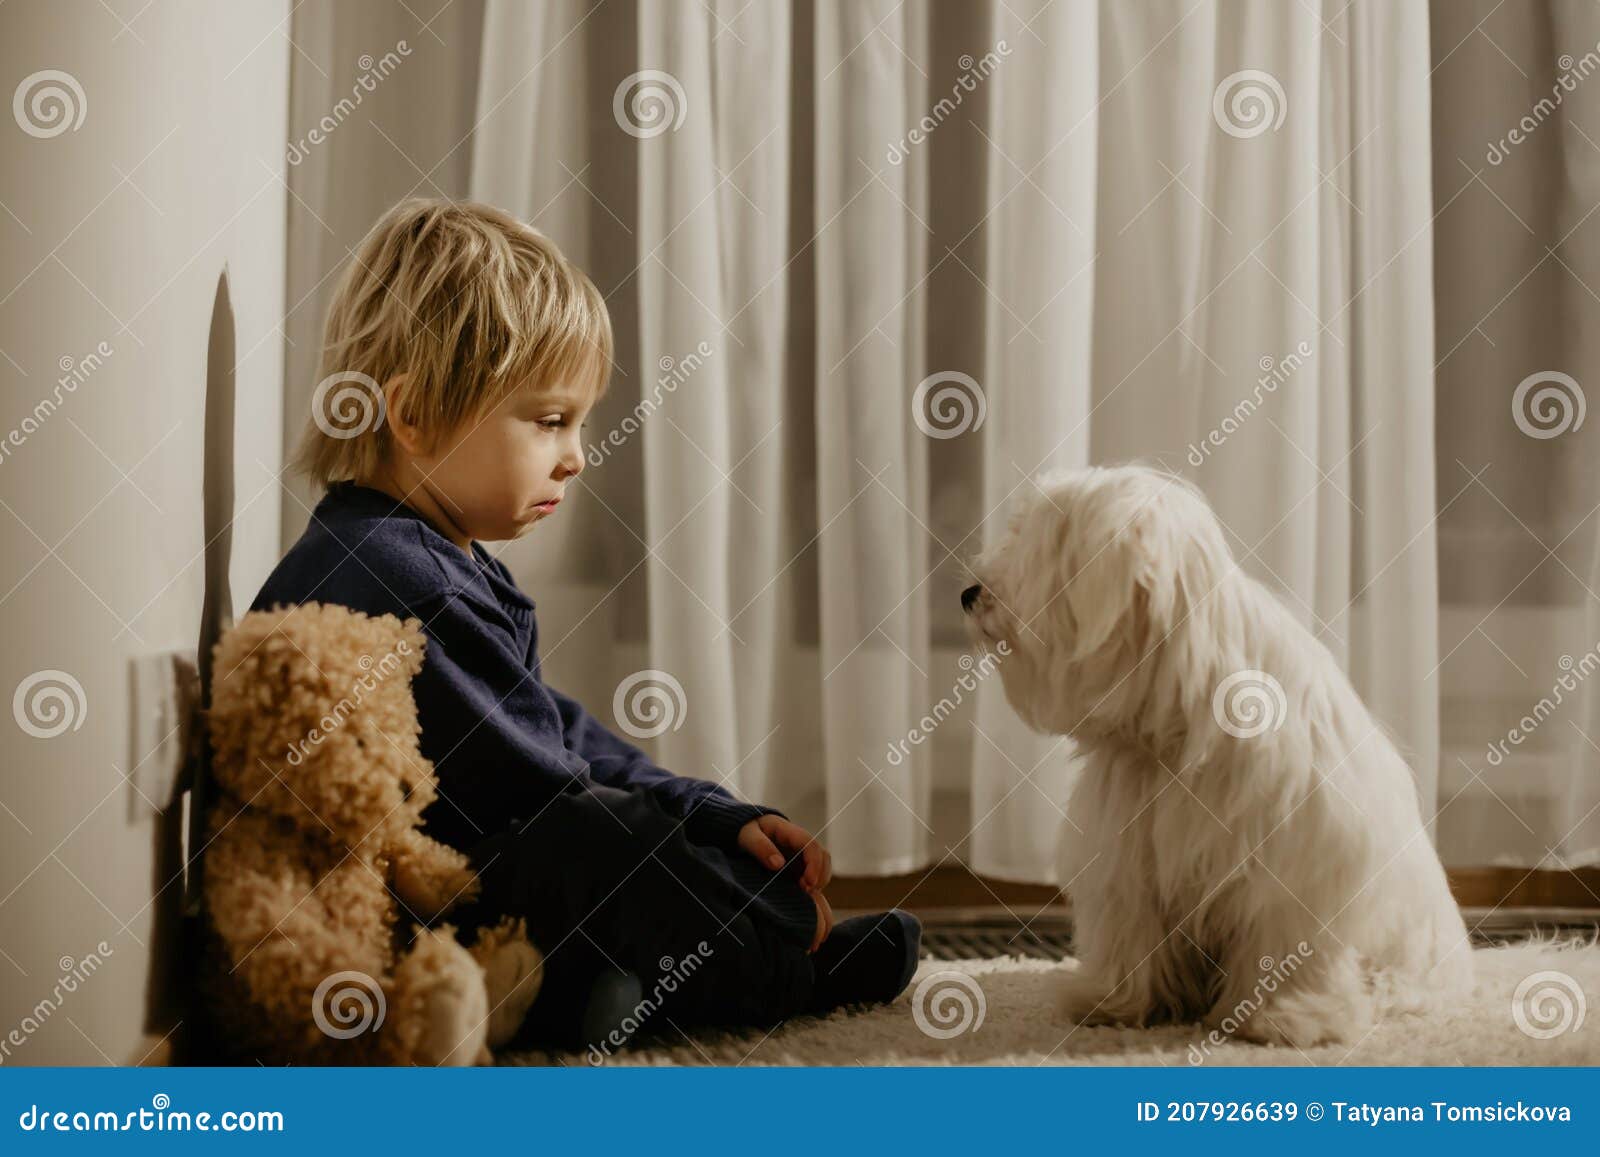 angry little toddler child, blond boy, sitting in corner with teddy punished for mischief